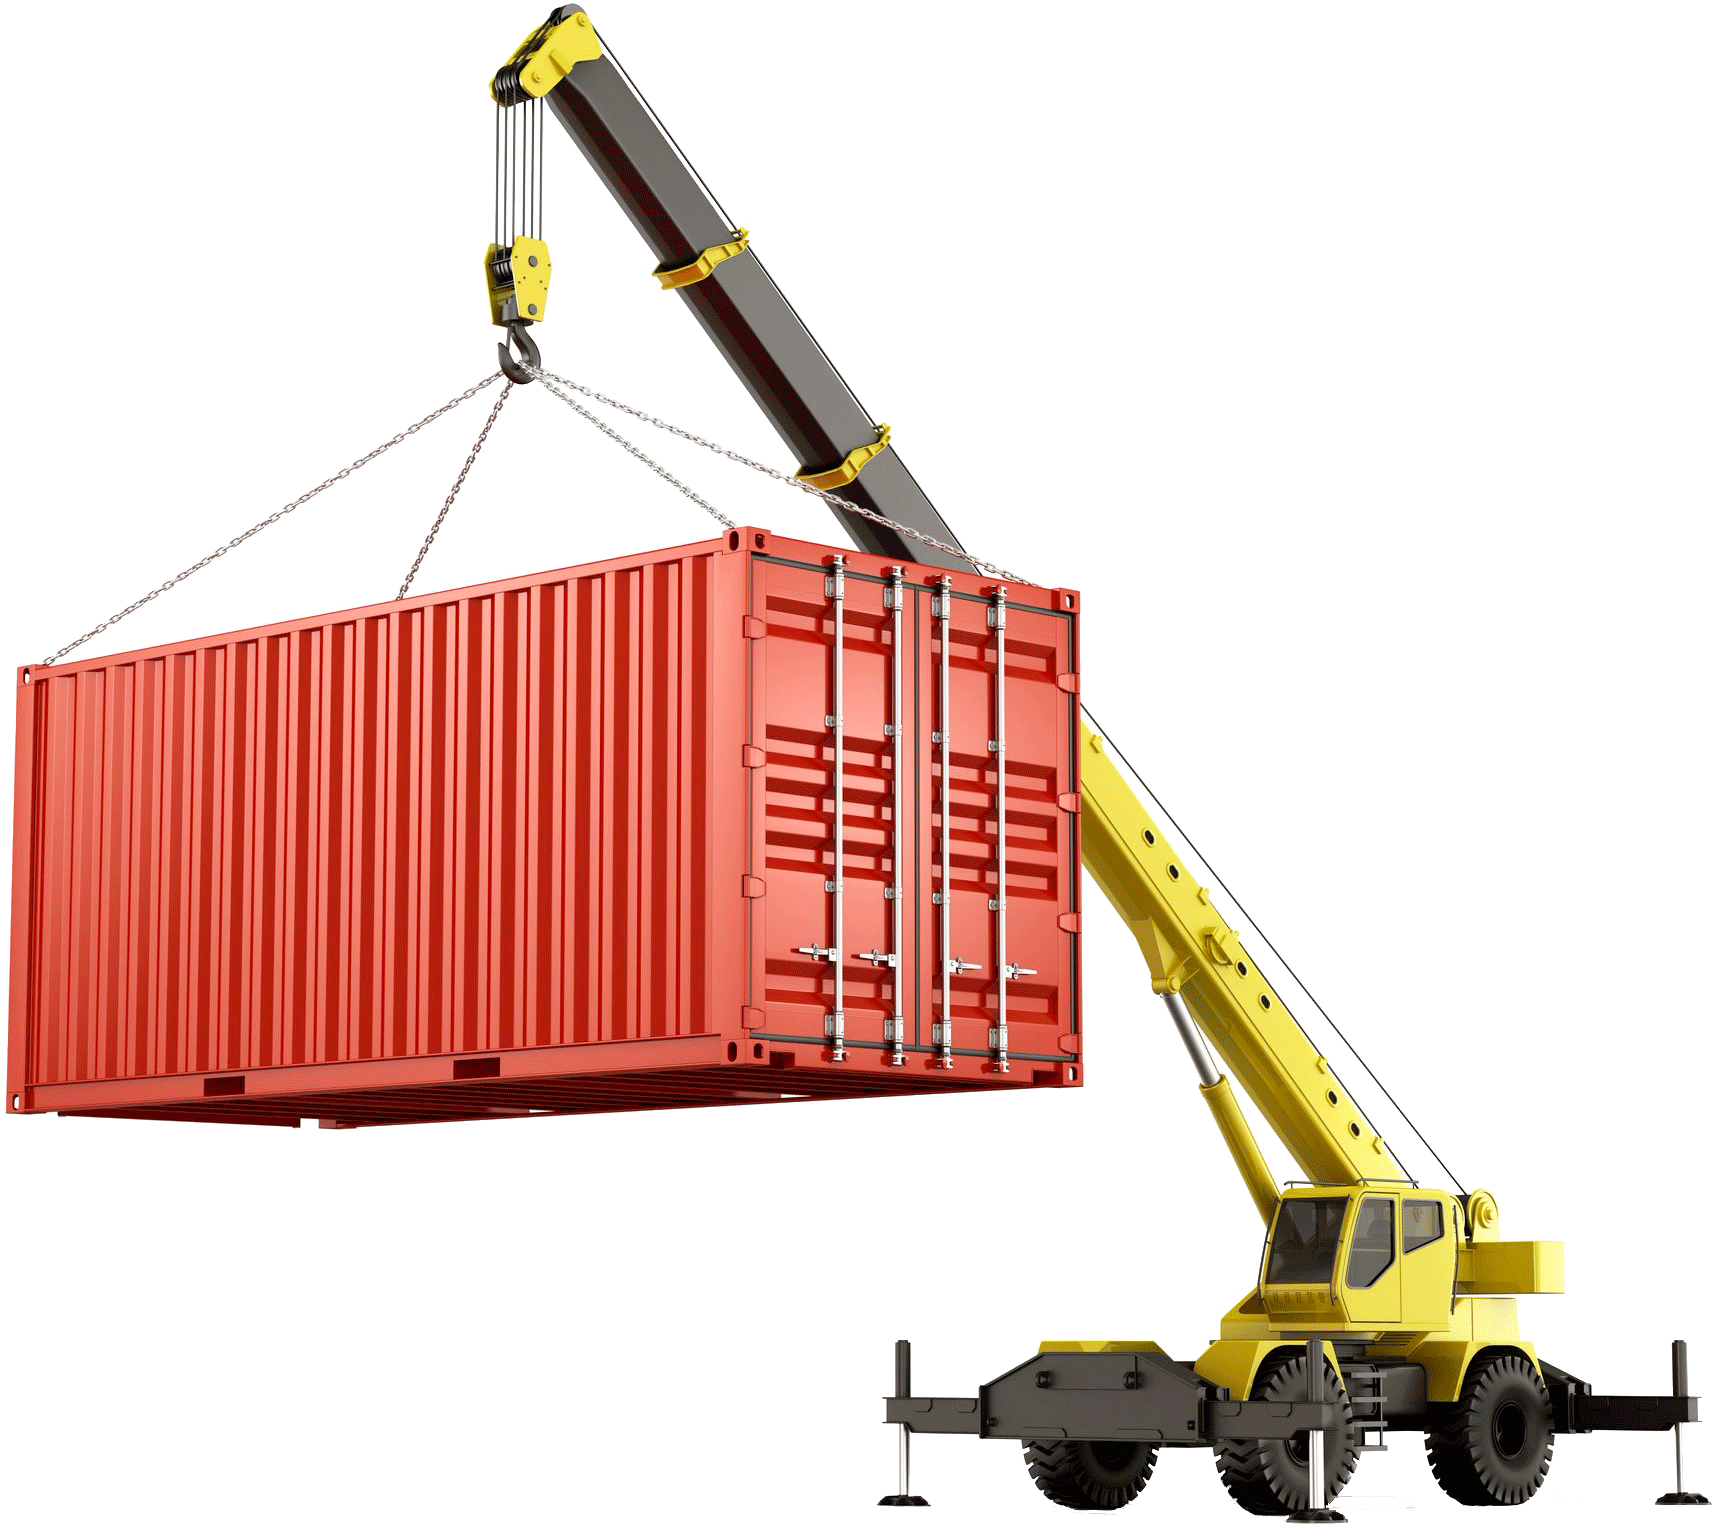 https://www.logitrans-france.com/wp-content/uploads/2016/02/container3-1.png